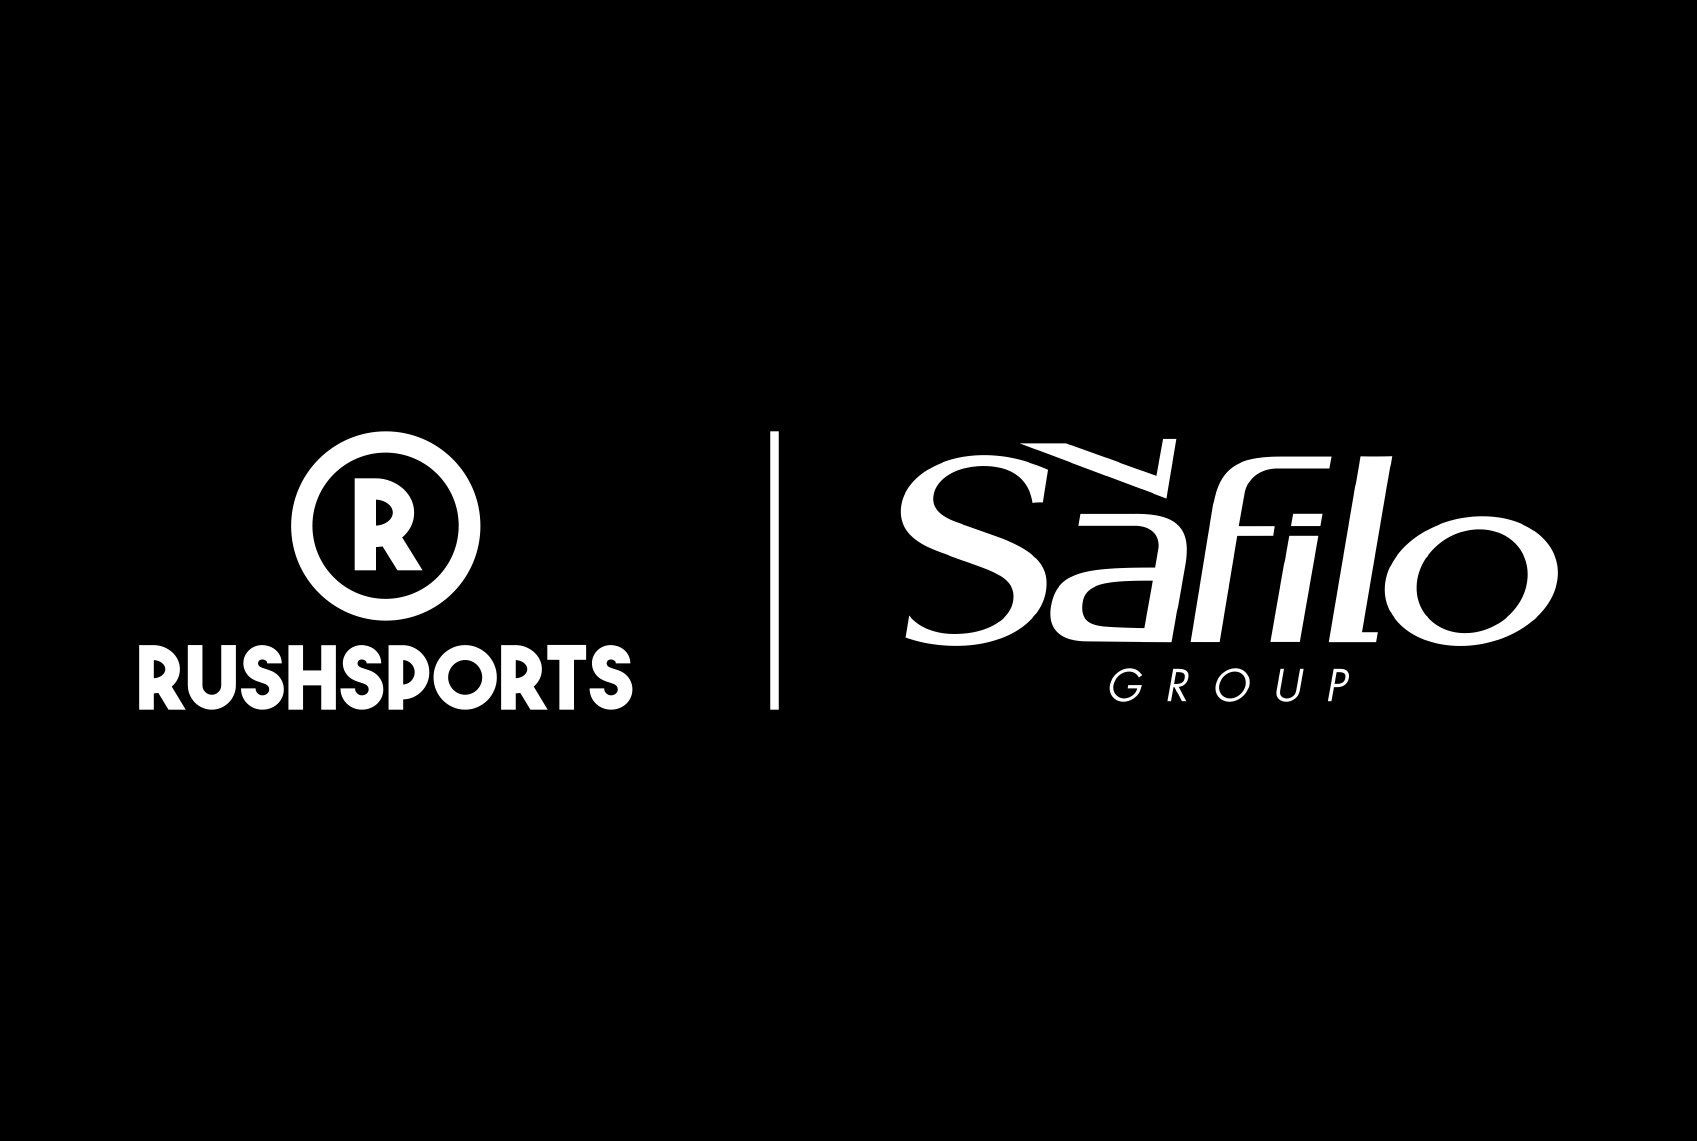 Announcement by Safilo Group S.p.A. and Rush Sports Group.